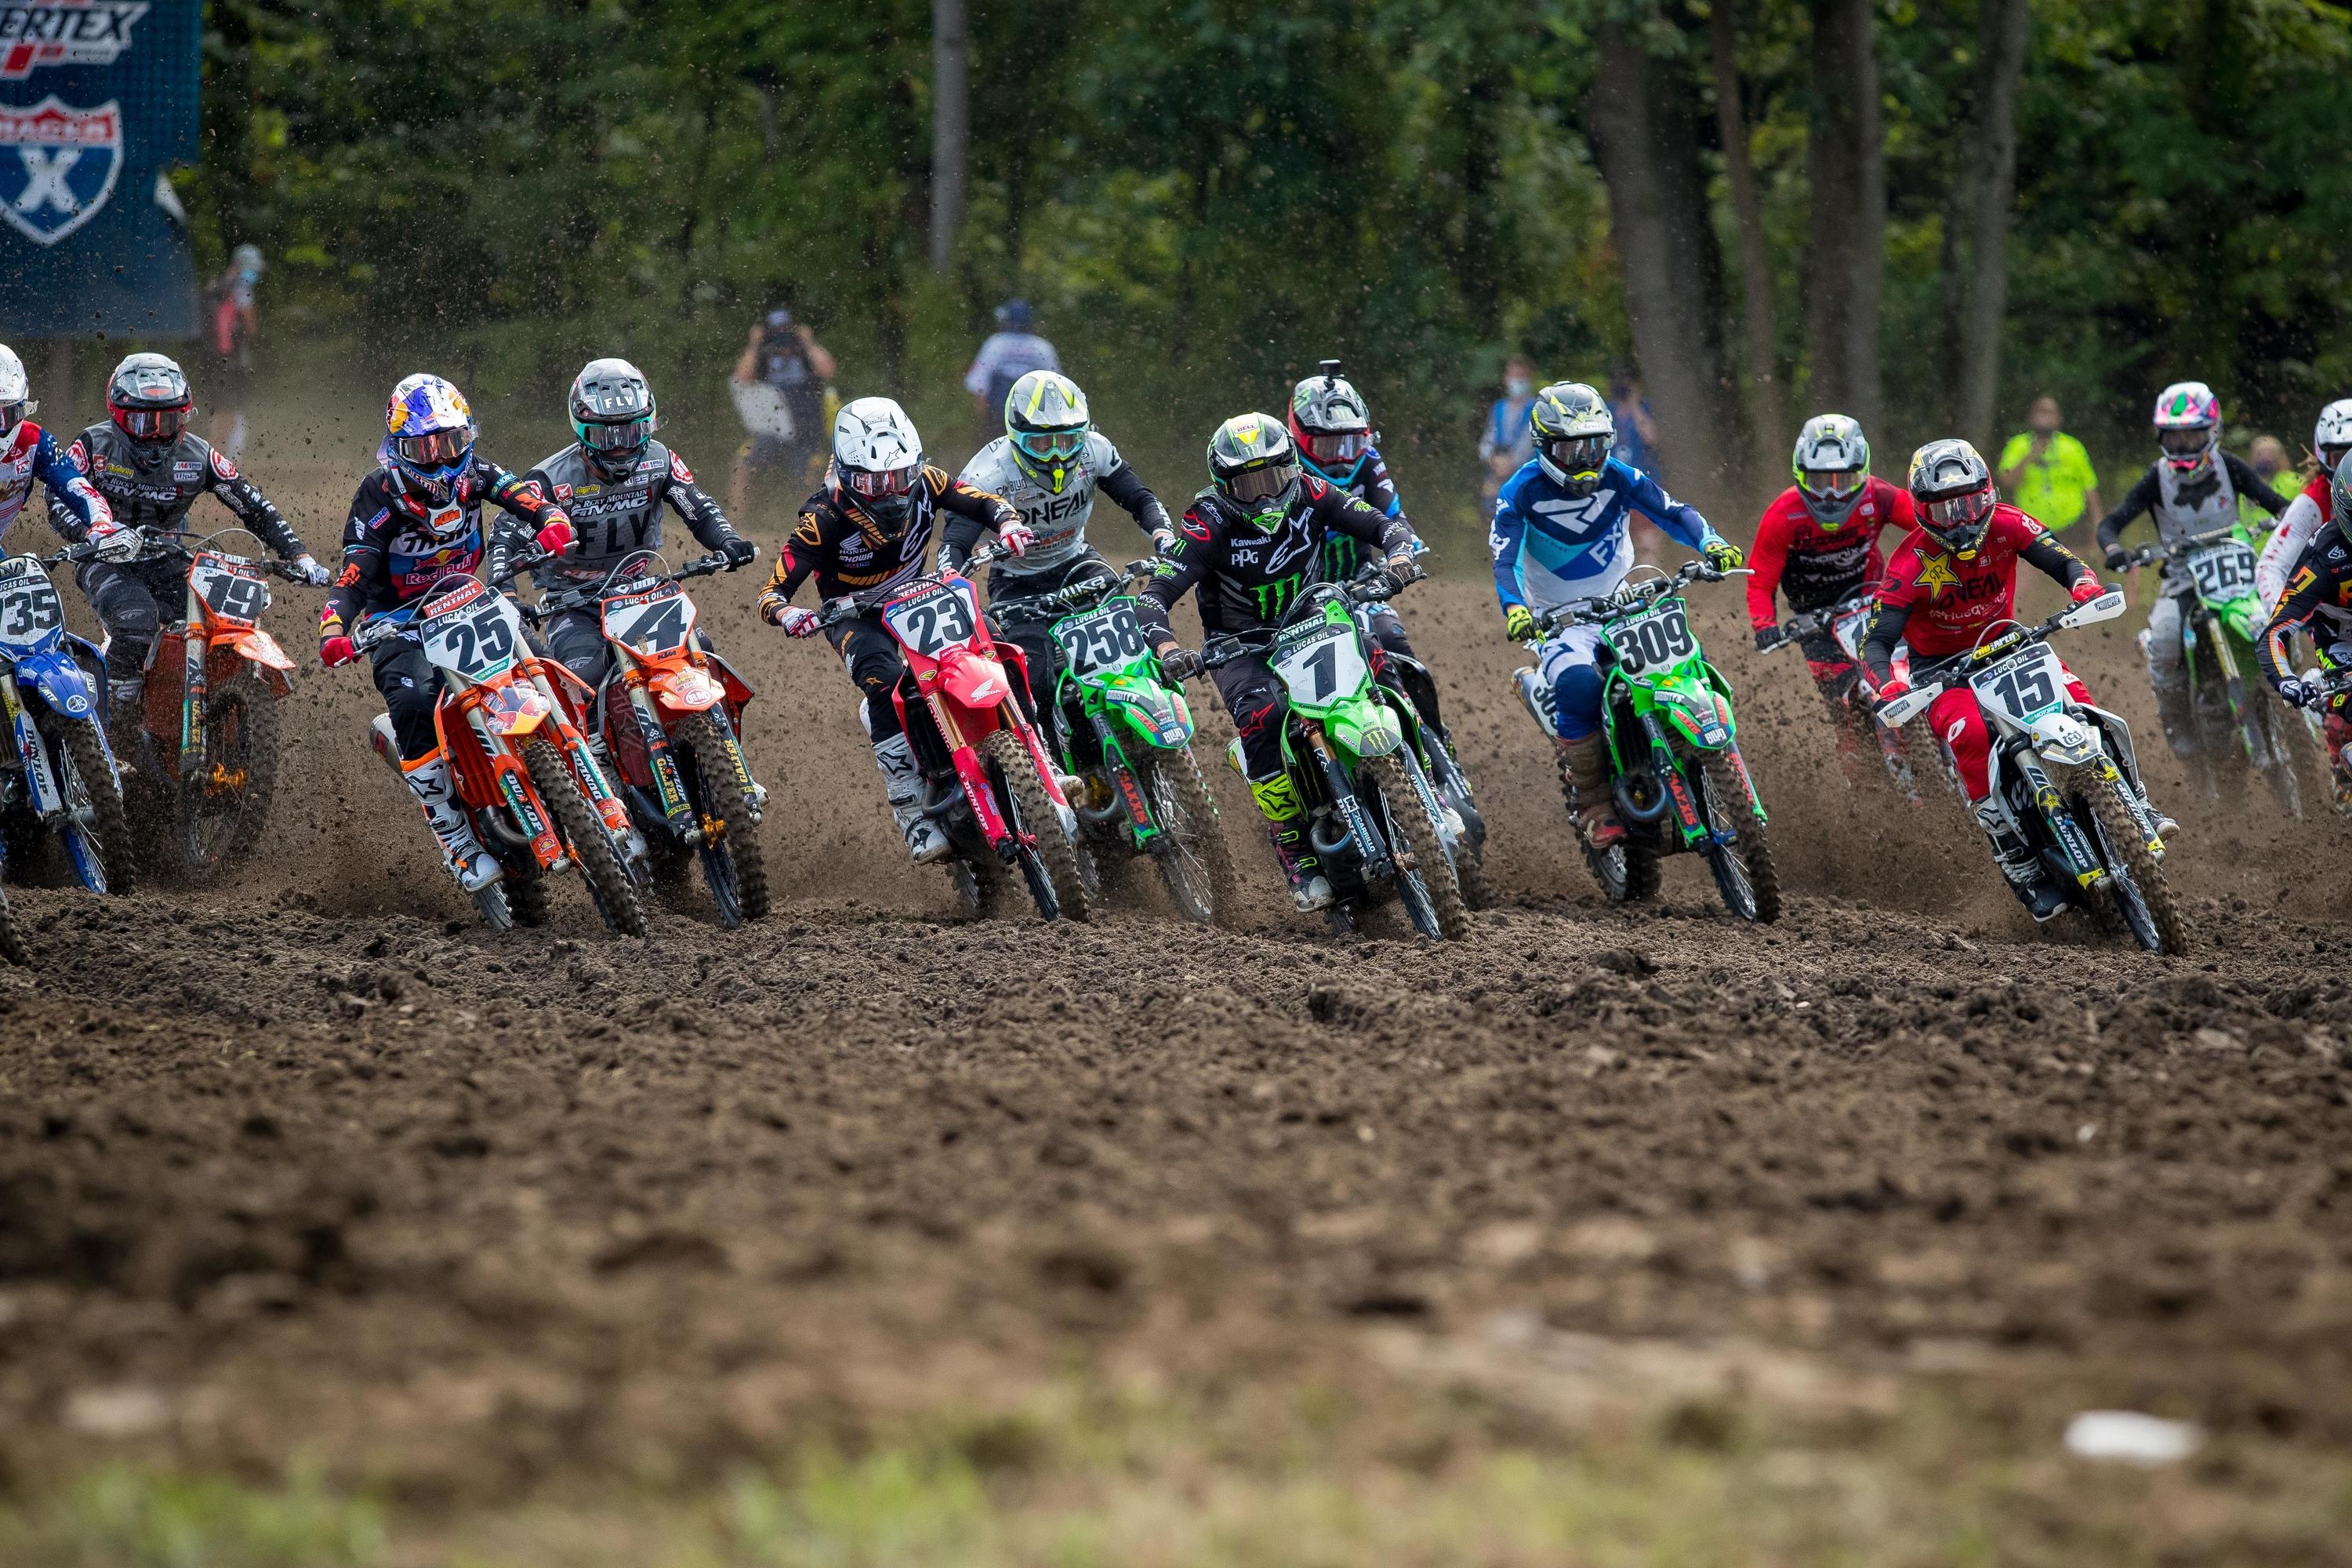 Competition Bulletin 2021-2: 2021 Rules for Professional Motocross Competition